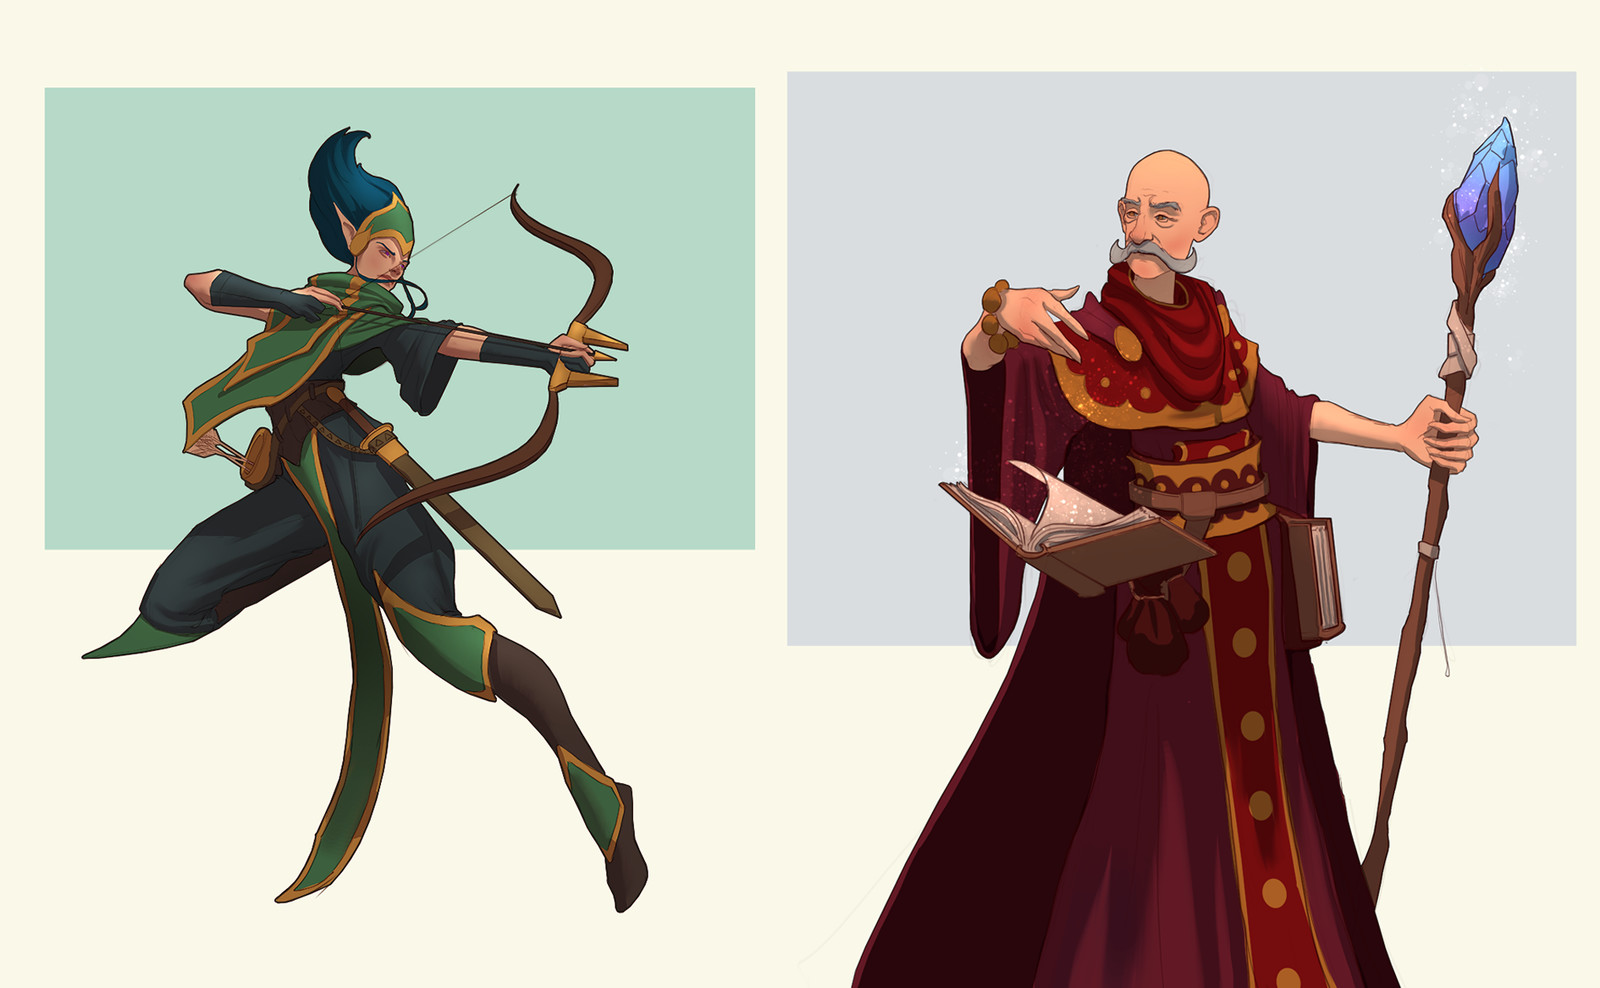 Elf ranger and Old wizard